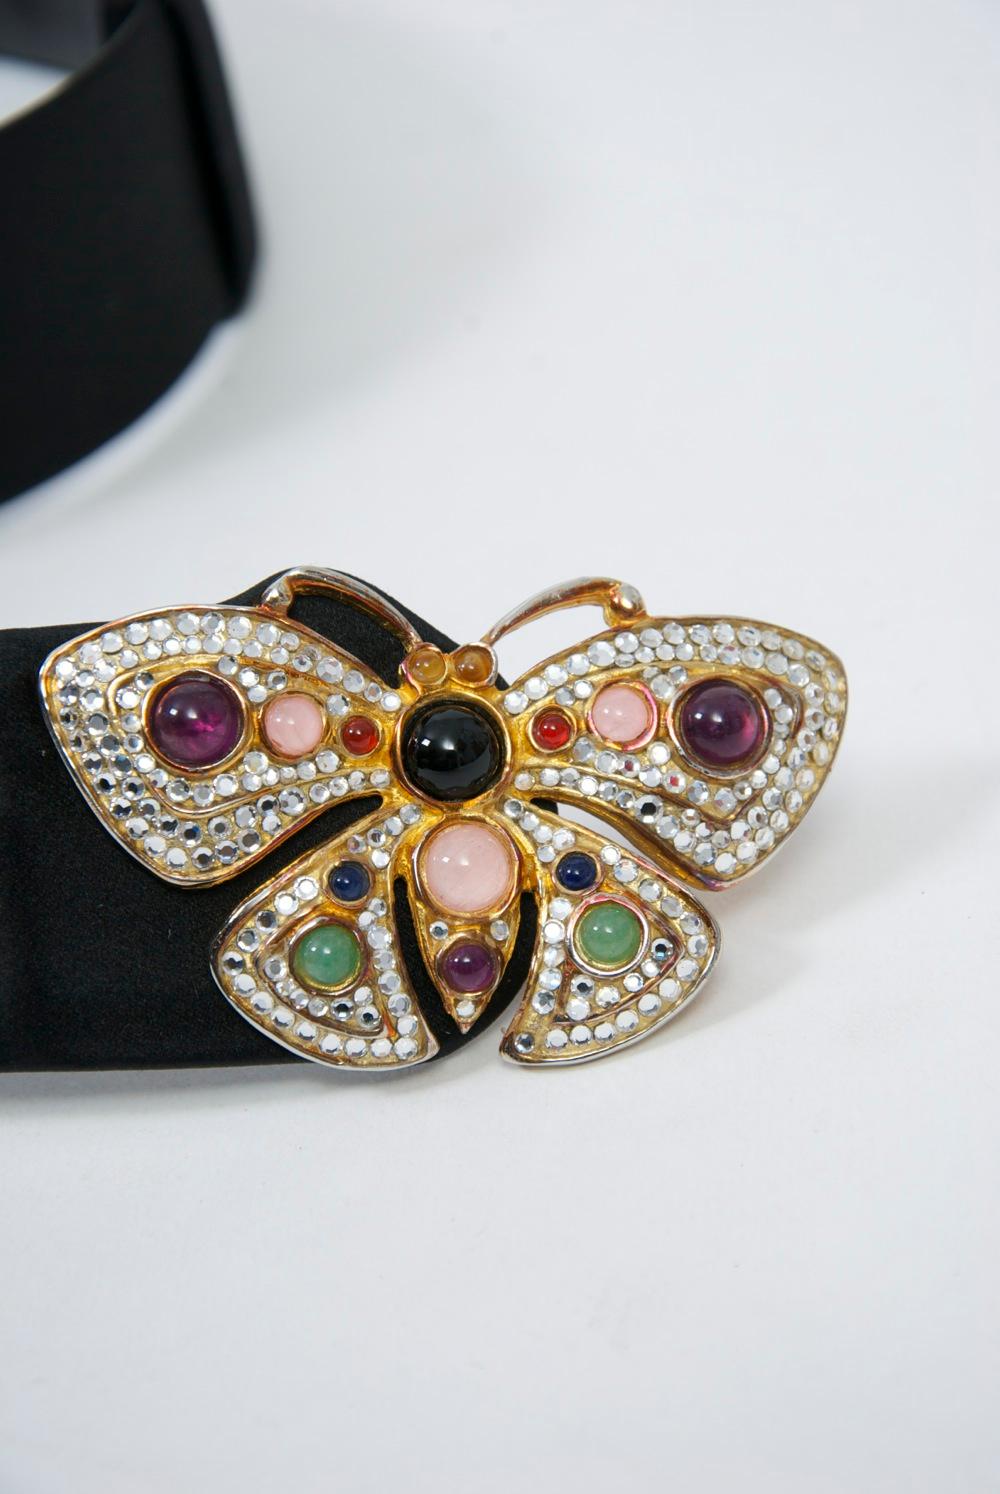 Elegant Judith Leiber black satin belt featuring a butterfly buckle composed of crystals punctuated by various colored cabochons. Belt is adjustable - one size fits all.